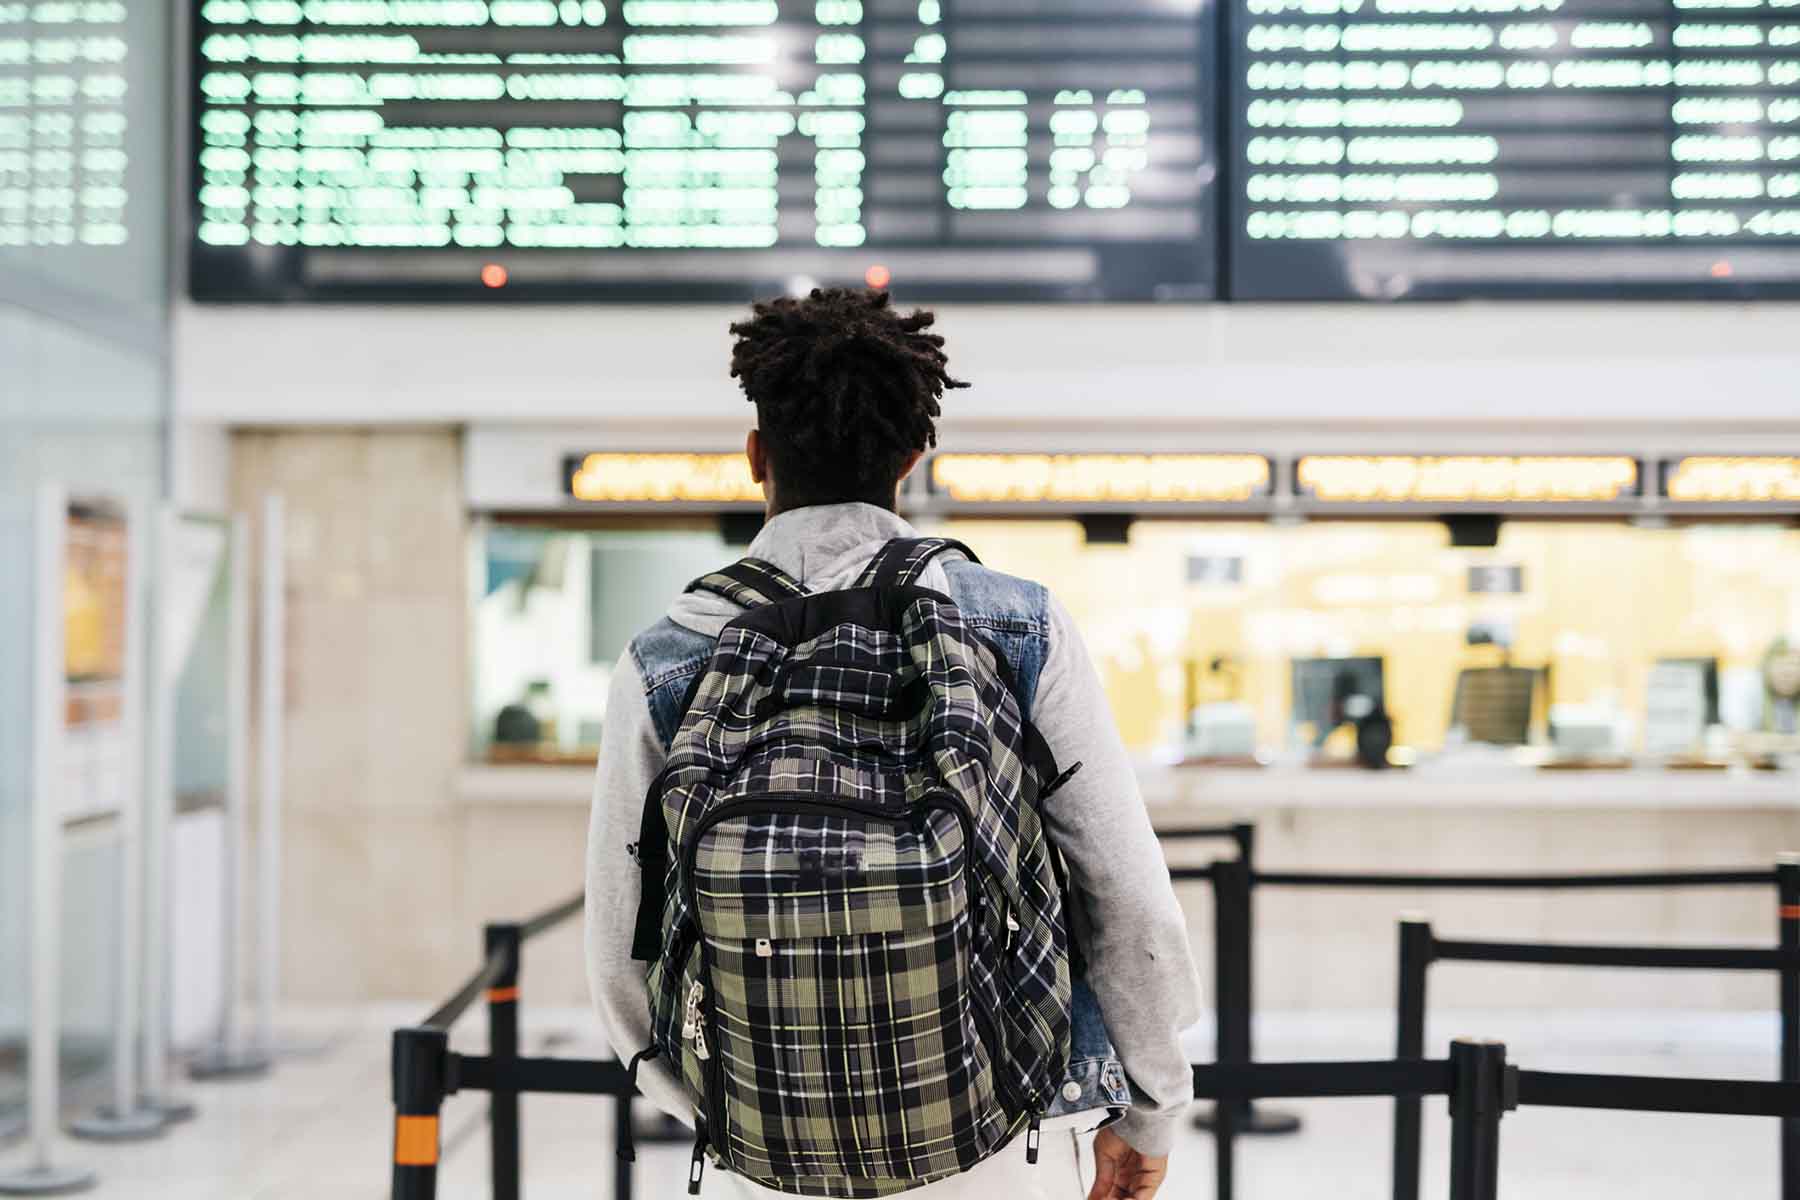 Young man standing in airport looking at board of destinations.